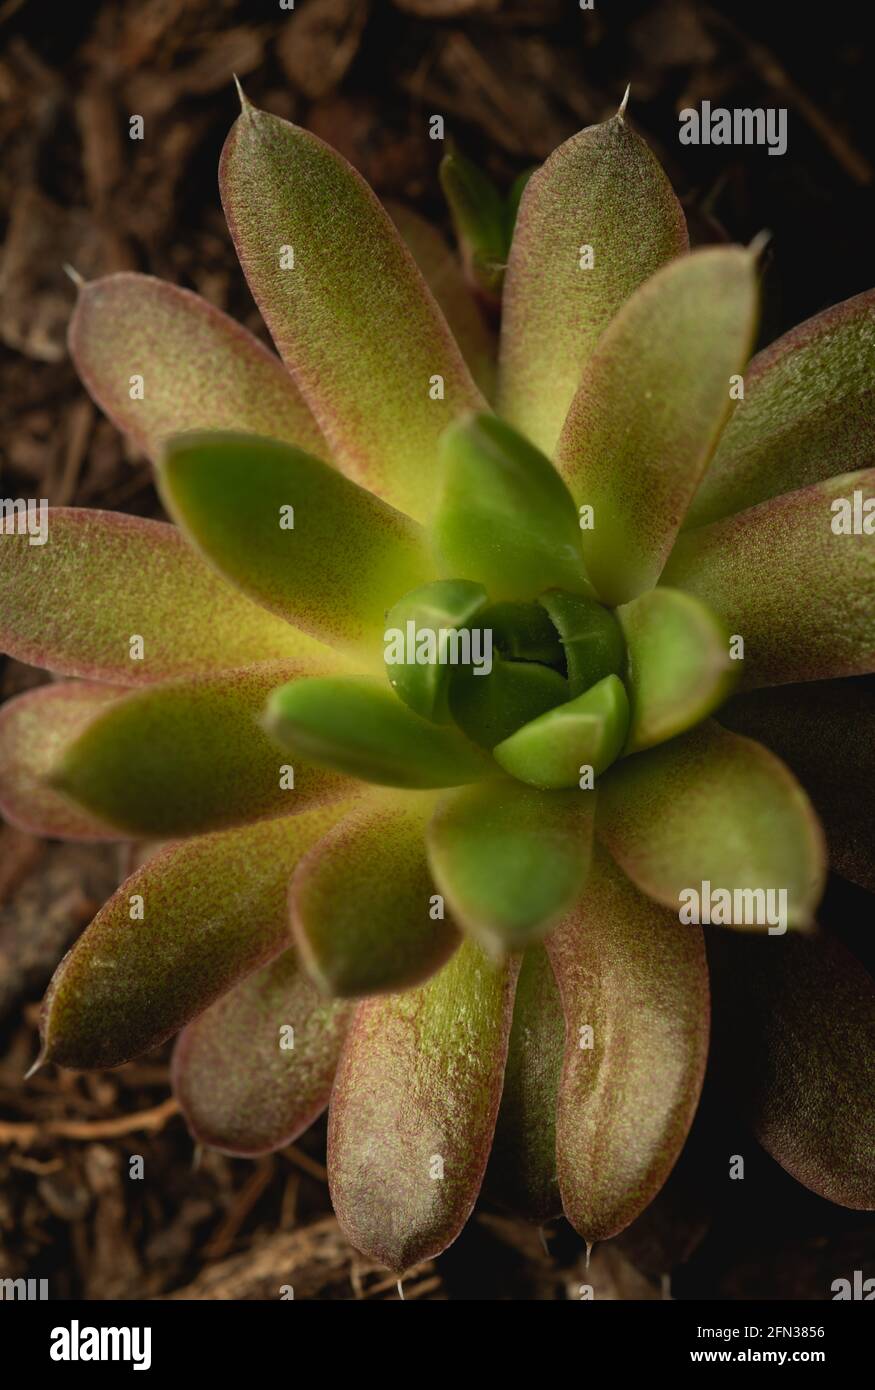 Macro close up photograph of a succulent plant on black background Stock Photo